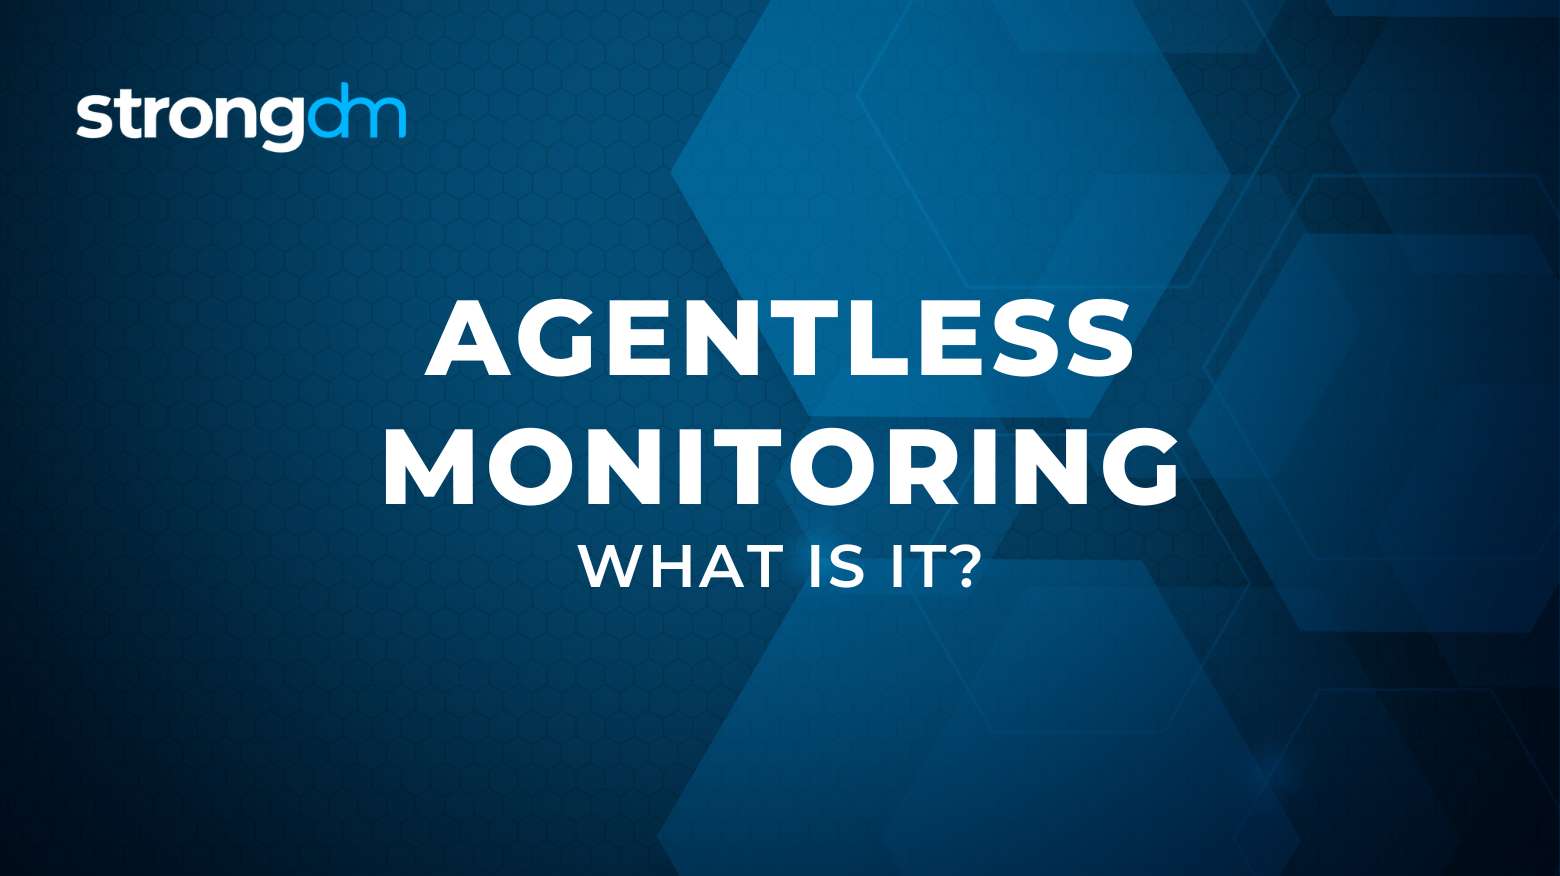 What is Agentless Monitoring? 